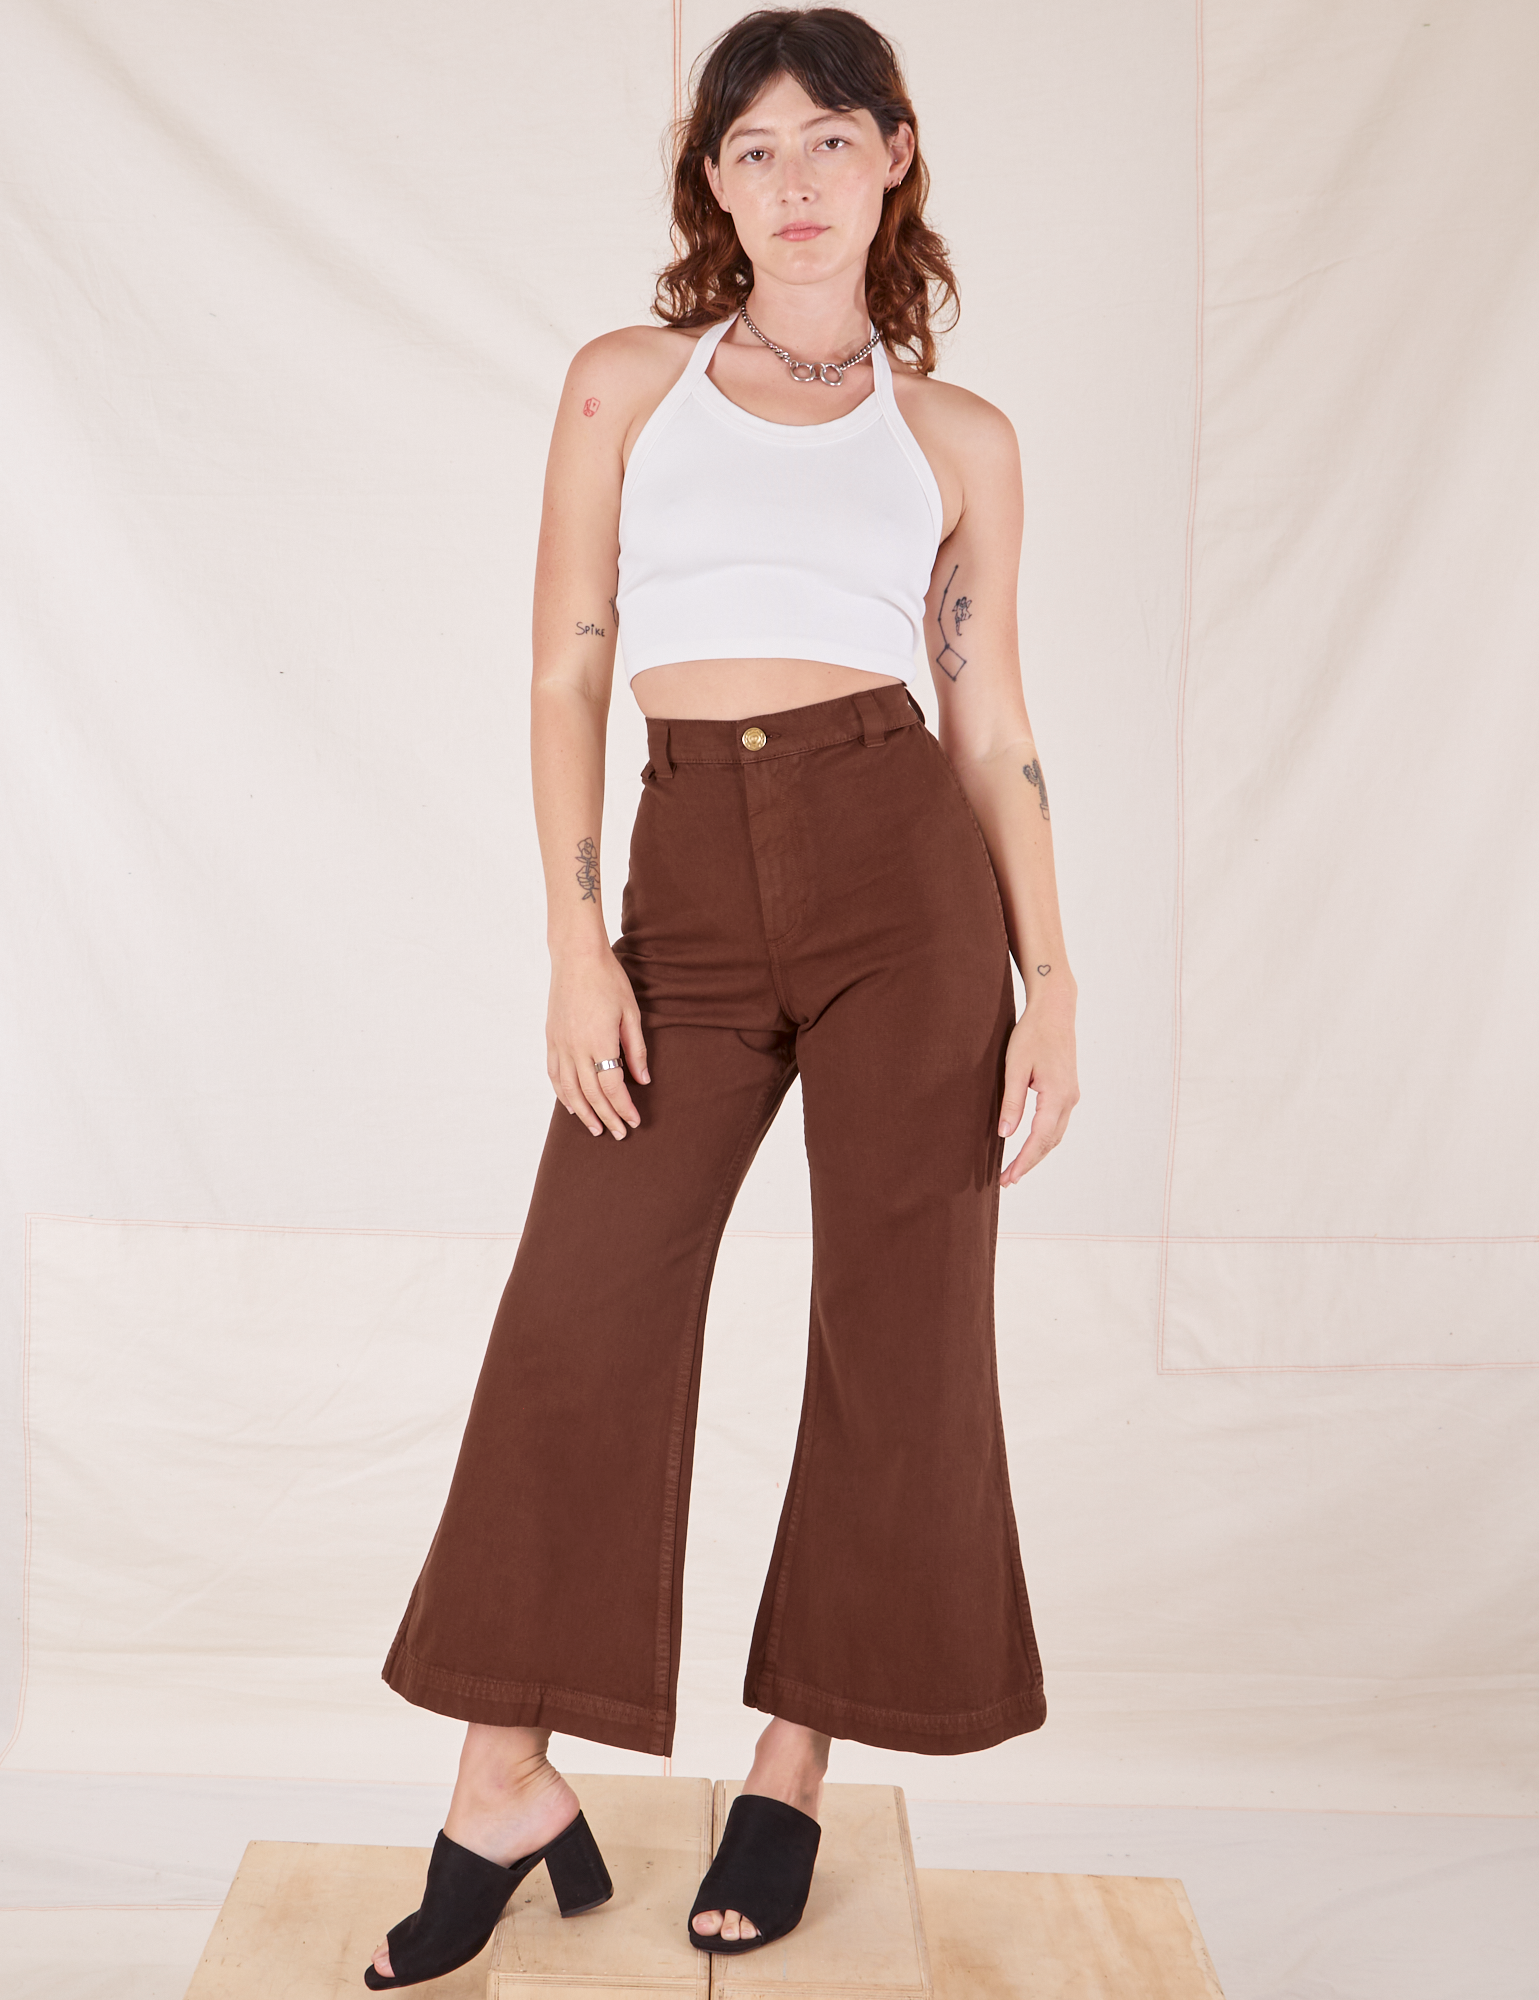 Alex is 5&#39;8&quot; and wearing XXS Bell Bottoms in Fudgesicle Brown paired with a Halter Top in vintage tee off-white